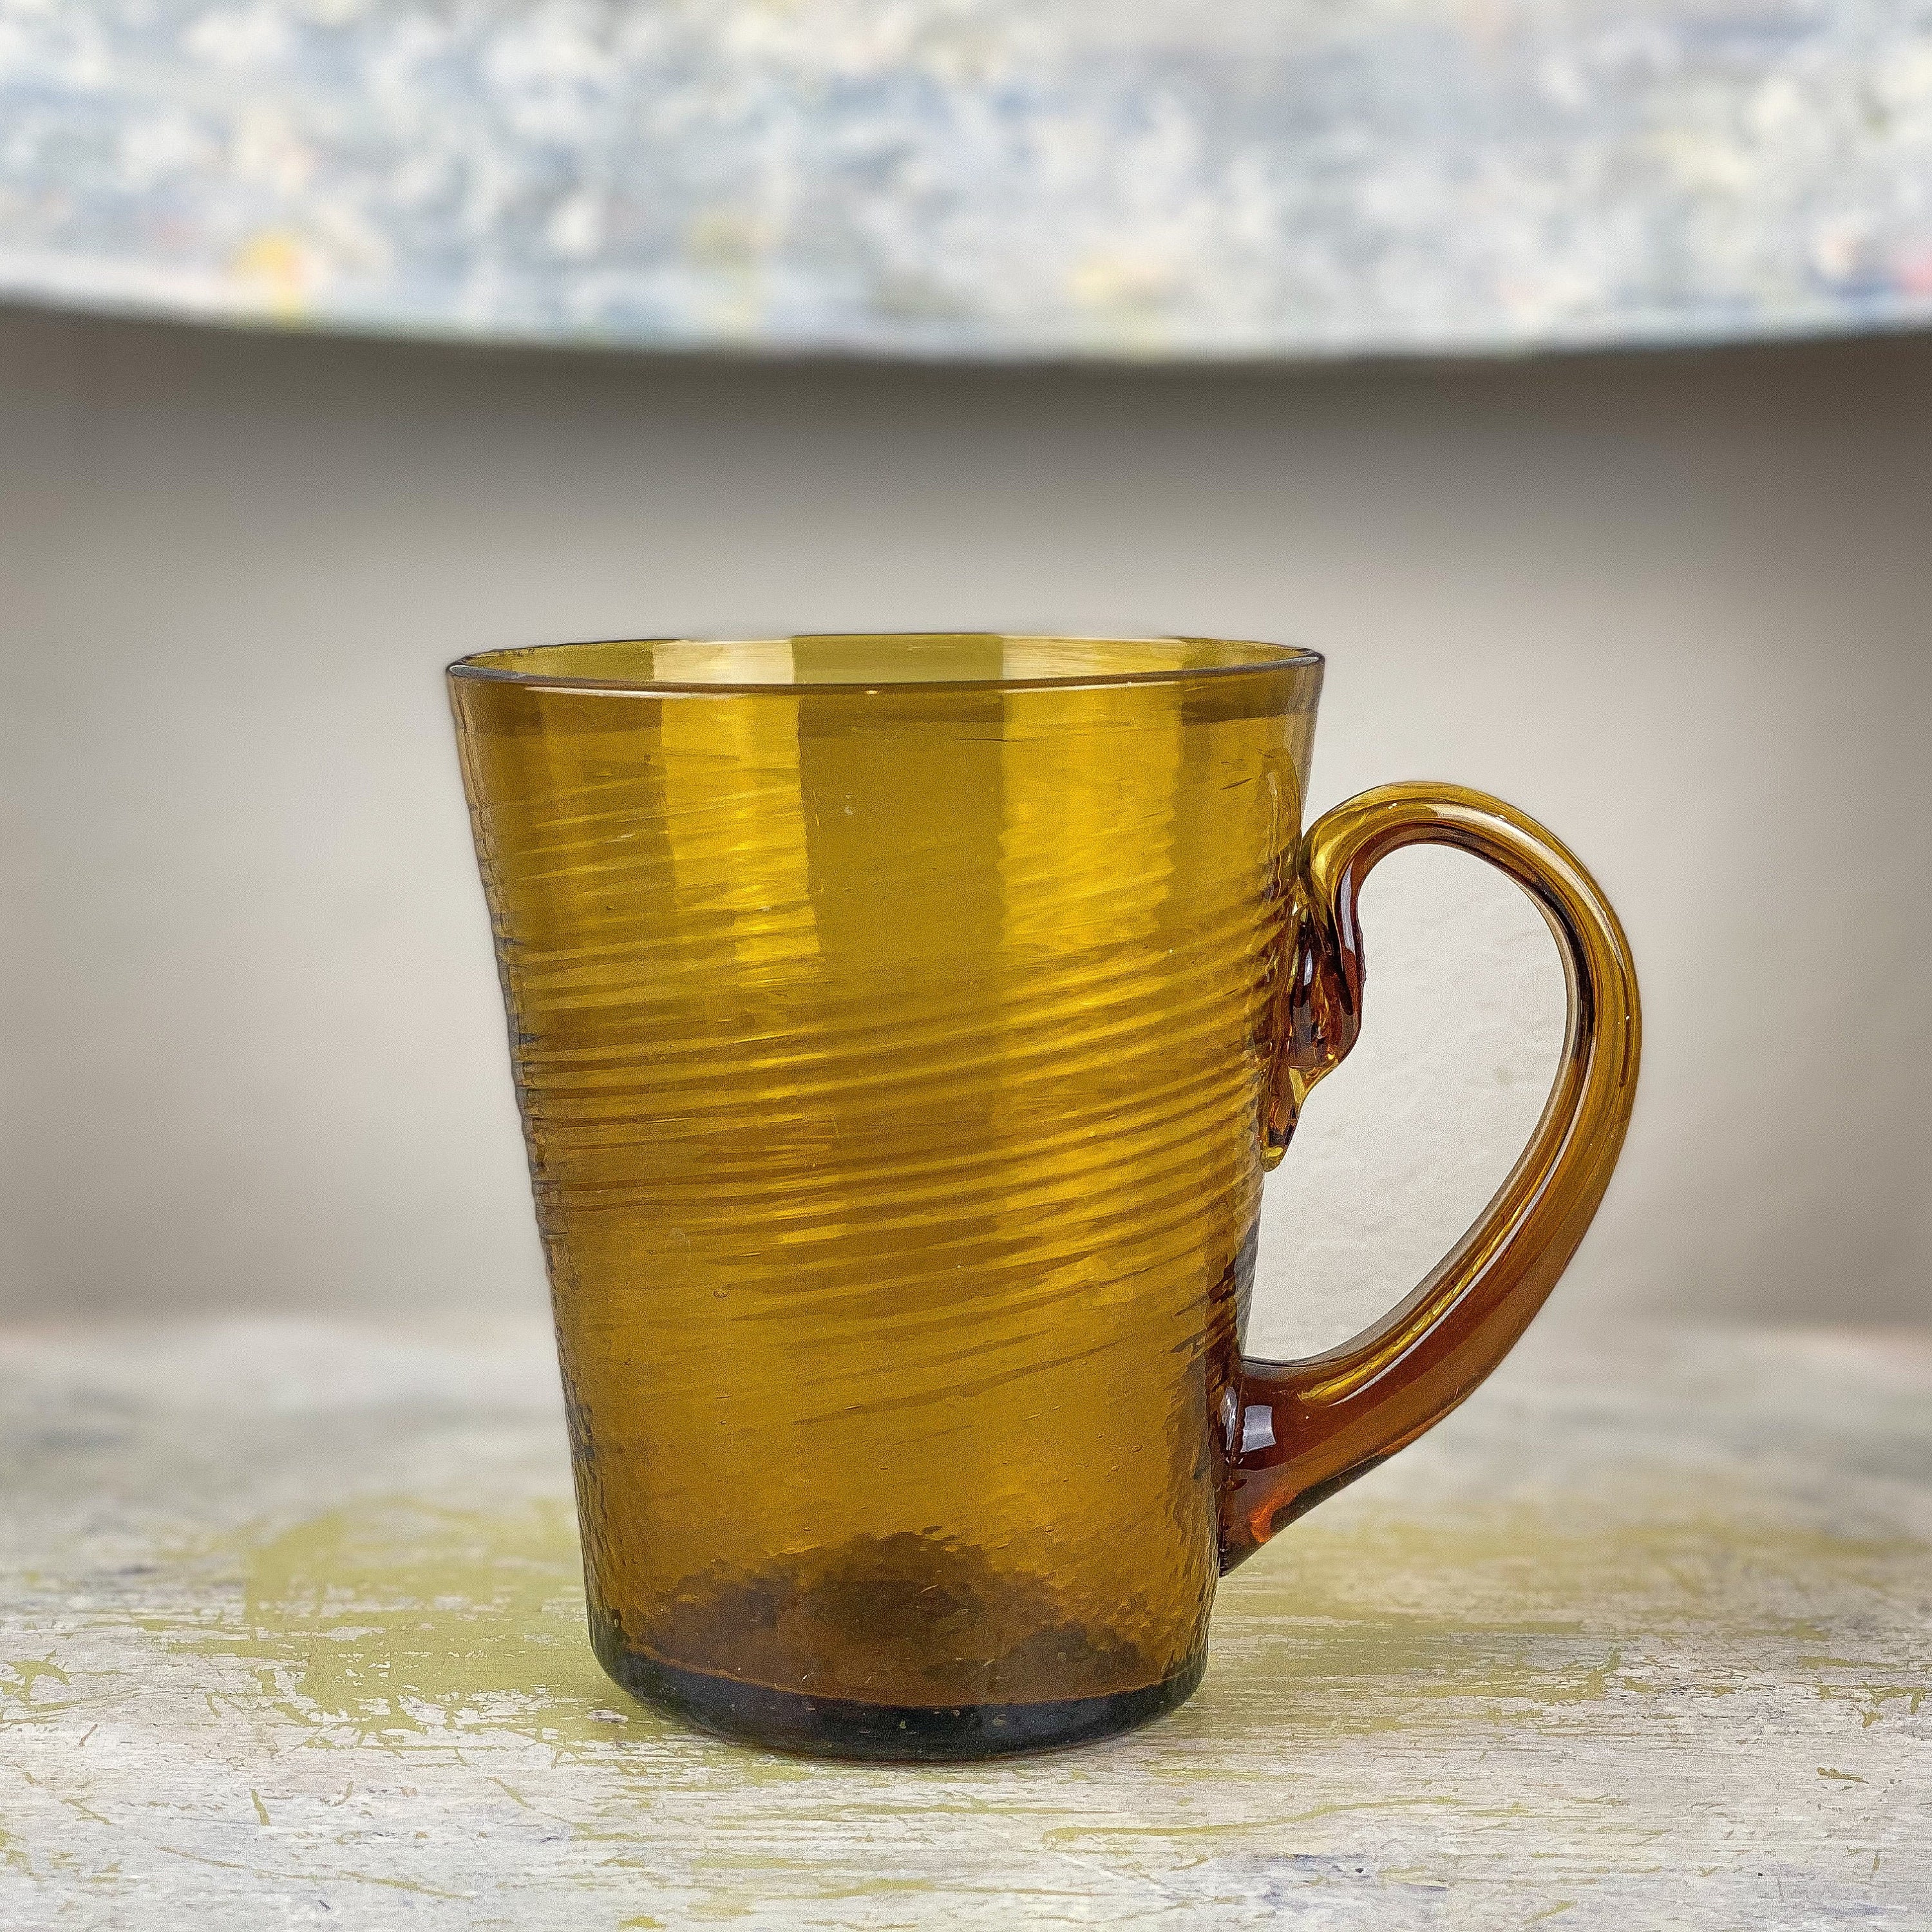 Multicolor Glass Tea Cup by Matteo Monni | Blue/ Amber